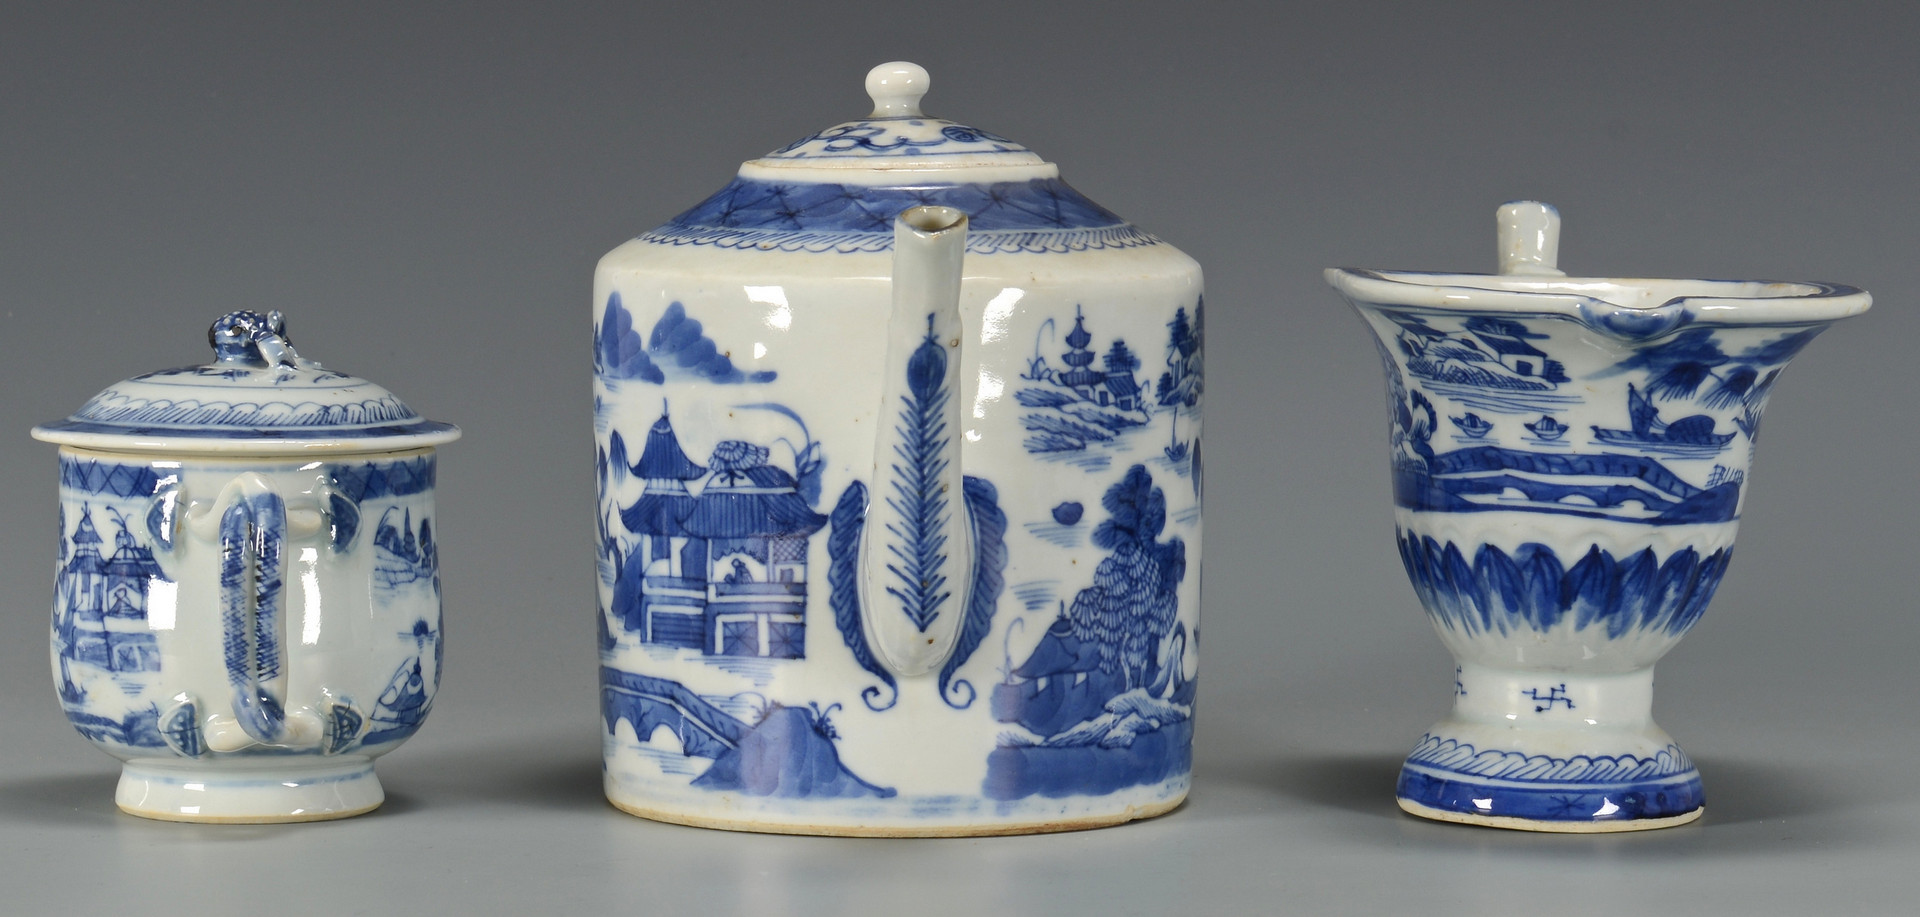 Lot 10: Grouping of Canton Porcelain